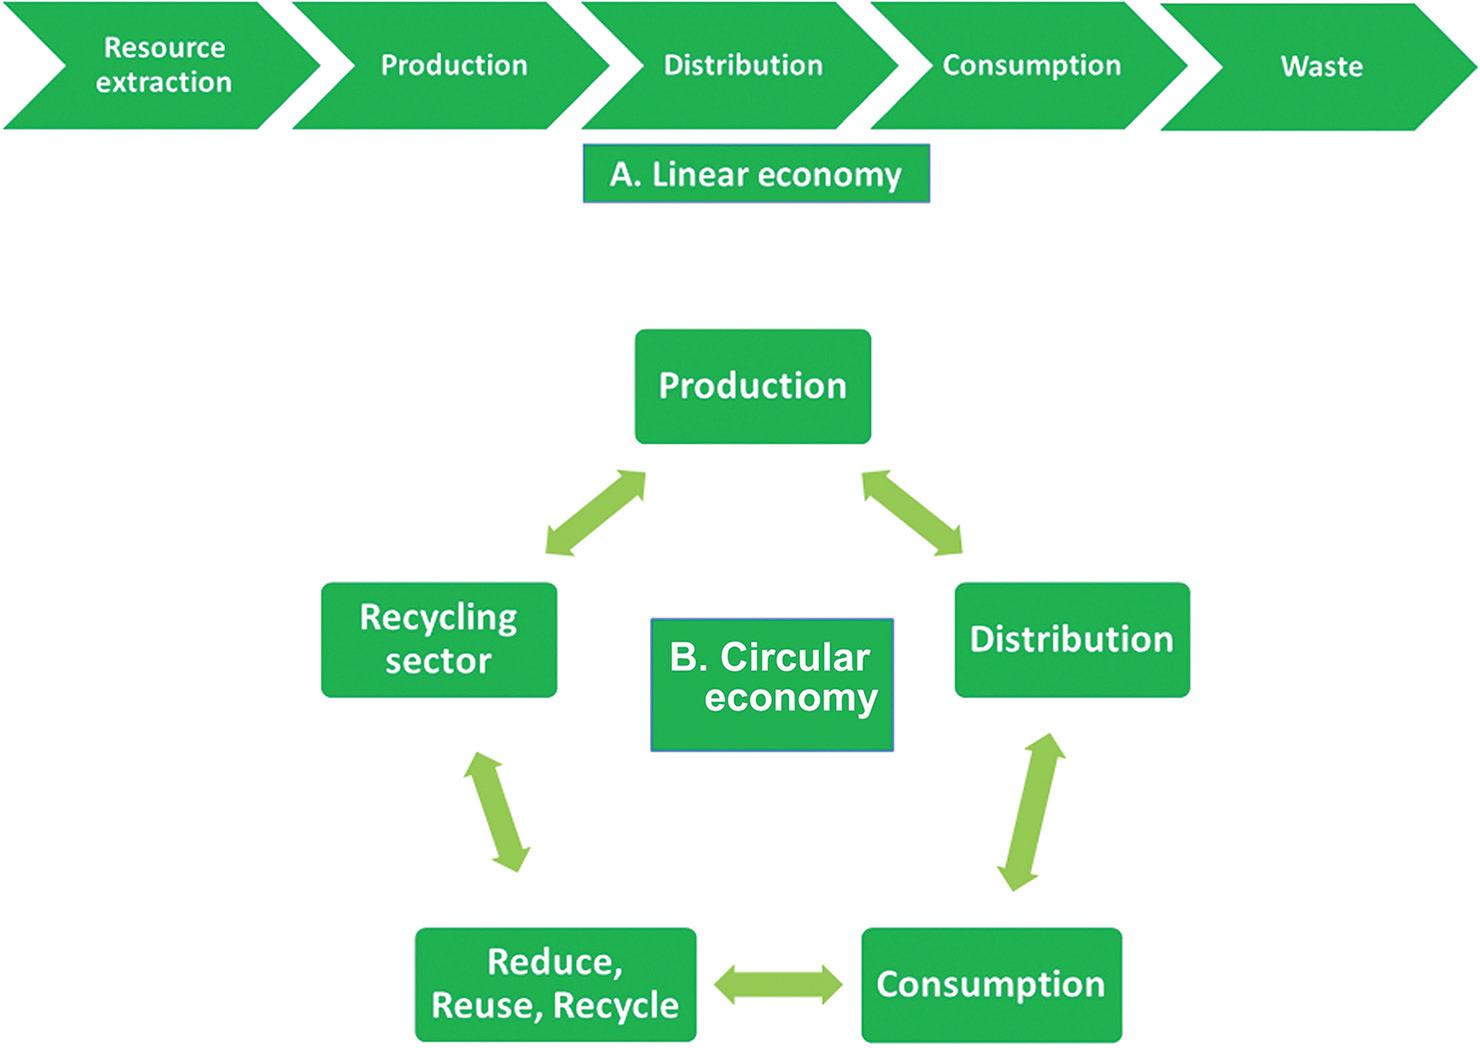 Key differences between (A) linear economy and (B) circular economy given by AkzoNobel (2015).